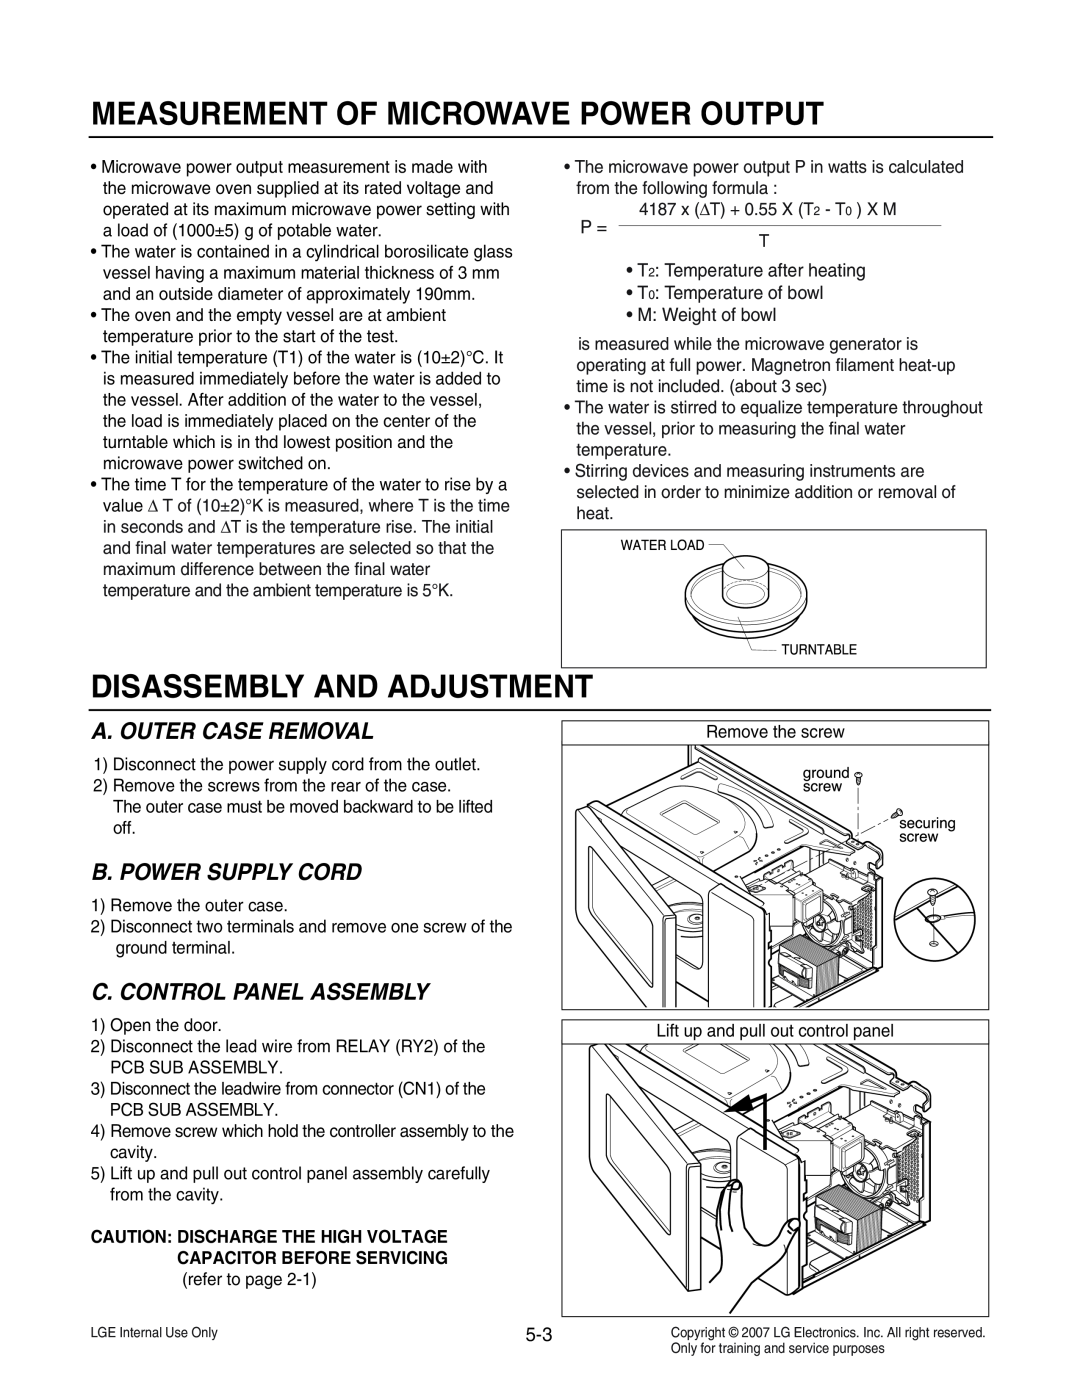 LG Electronics MS3447GR Measurement Of Microwave Power Output, Disassembly And Adjustment, A. Outer Case Removal 